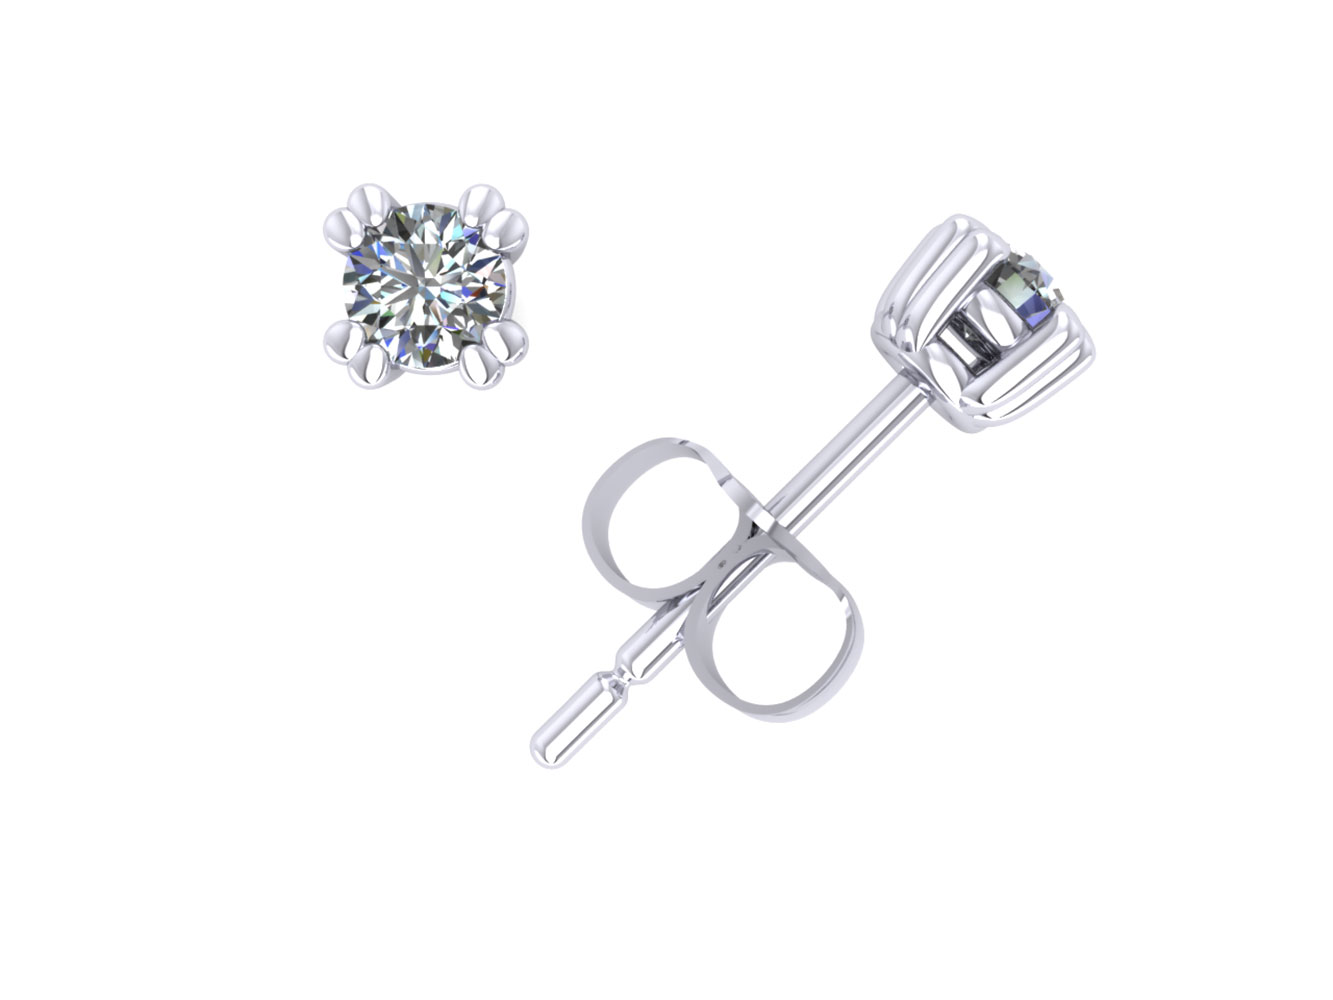 Jewel We Sell 1/3Ct Round Cut Diamond Basket Stud Earrings 14k White or Yellow Gold Double Prong H SI2